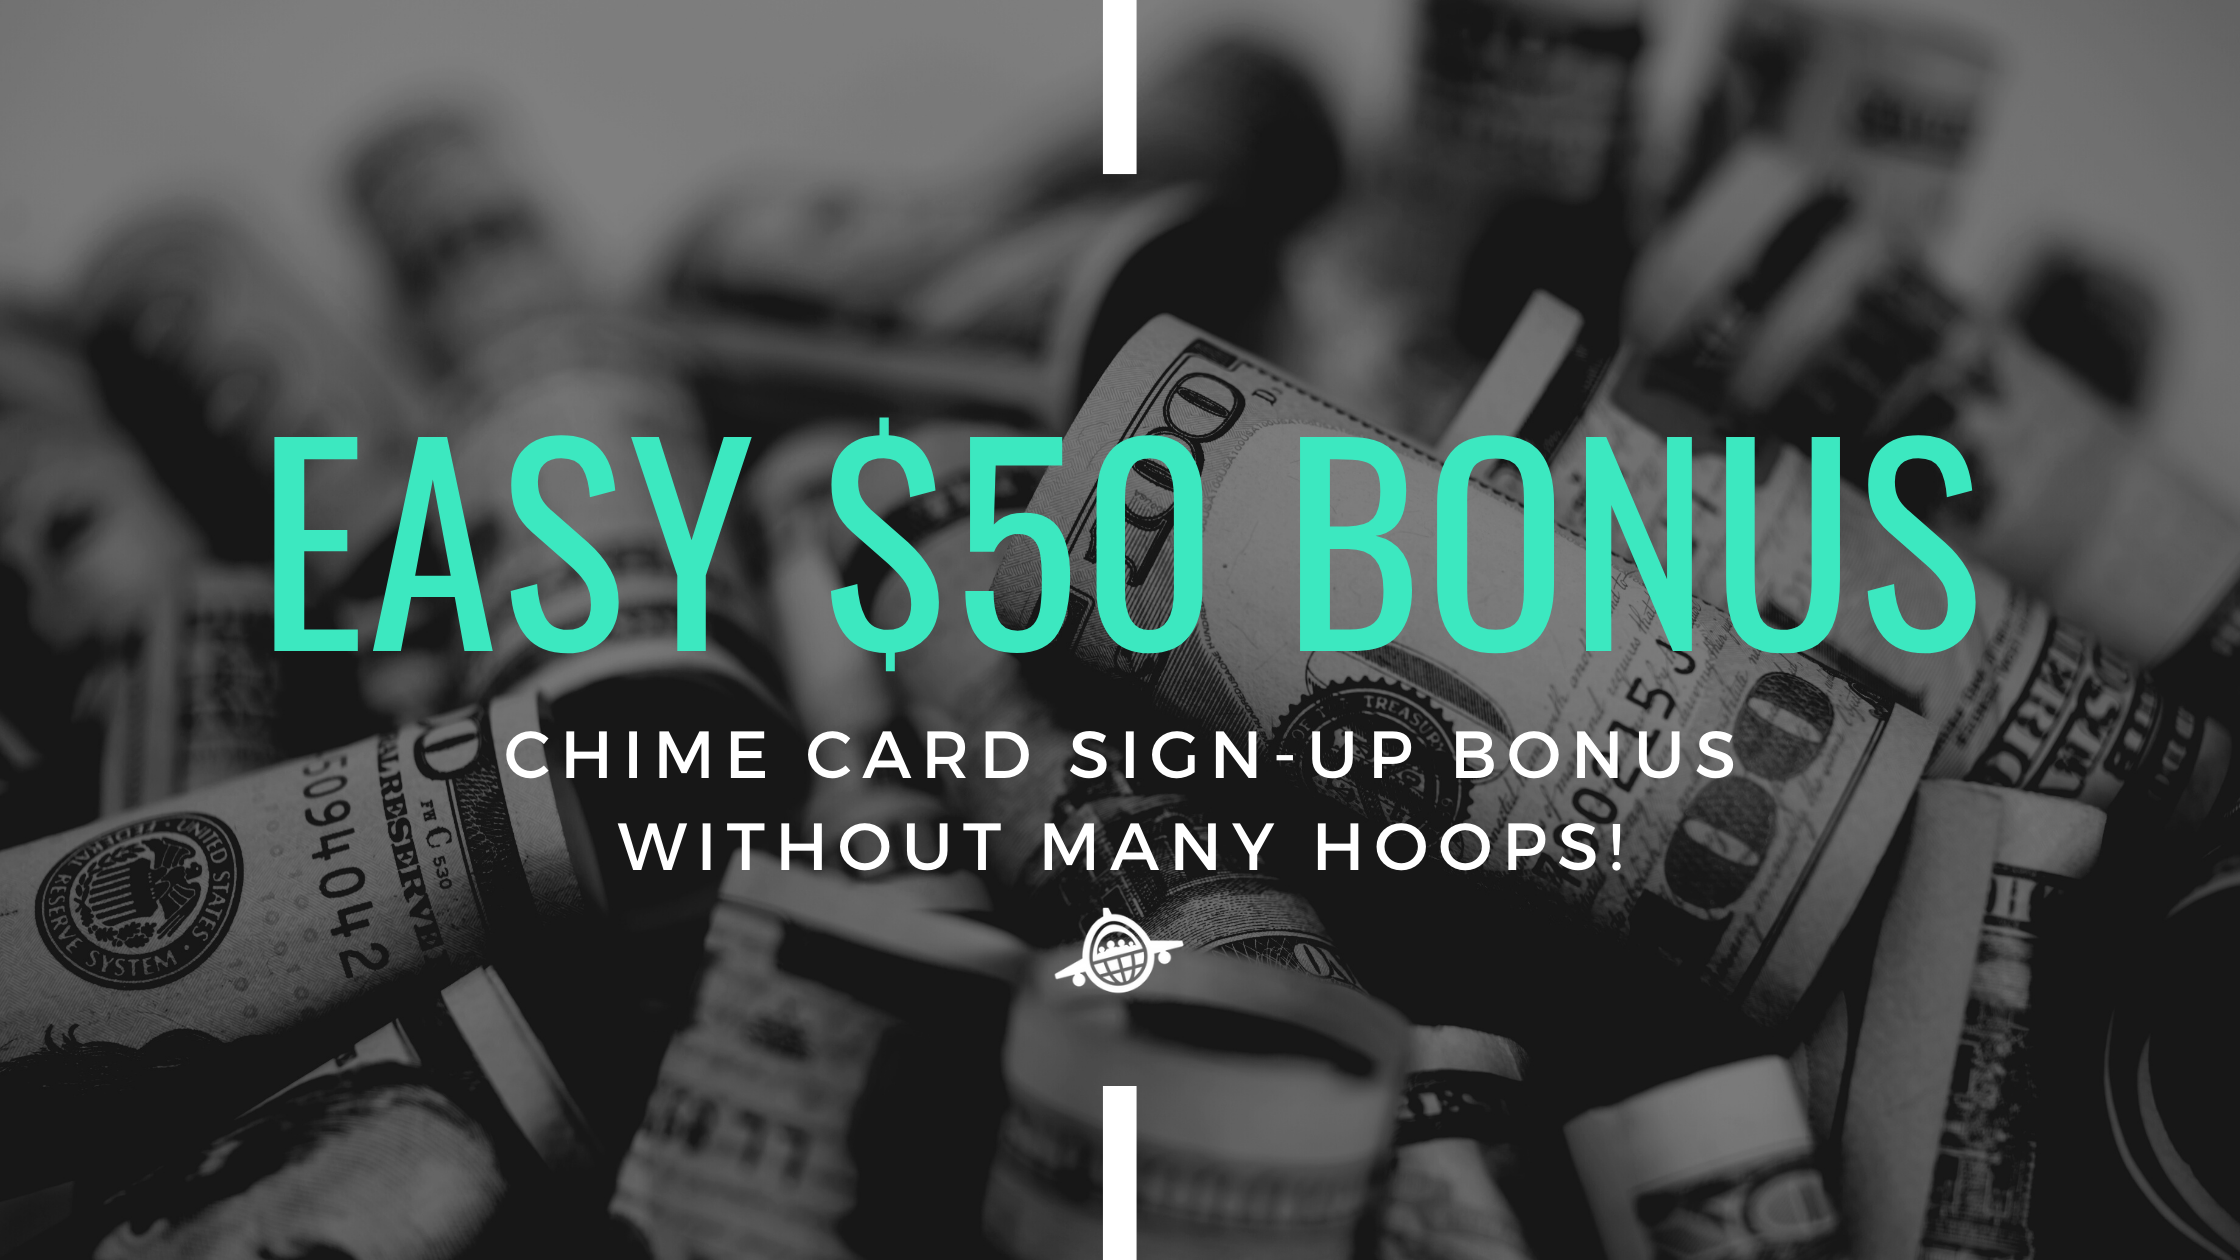 Chime Card Bonus Offer Get 50 with New SignUp!